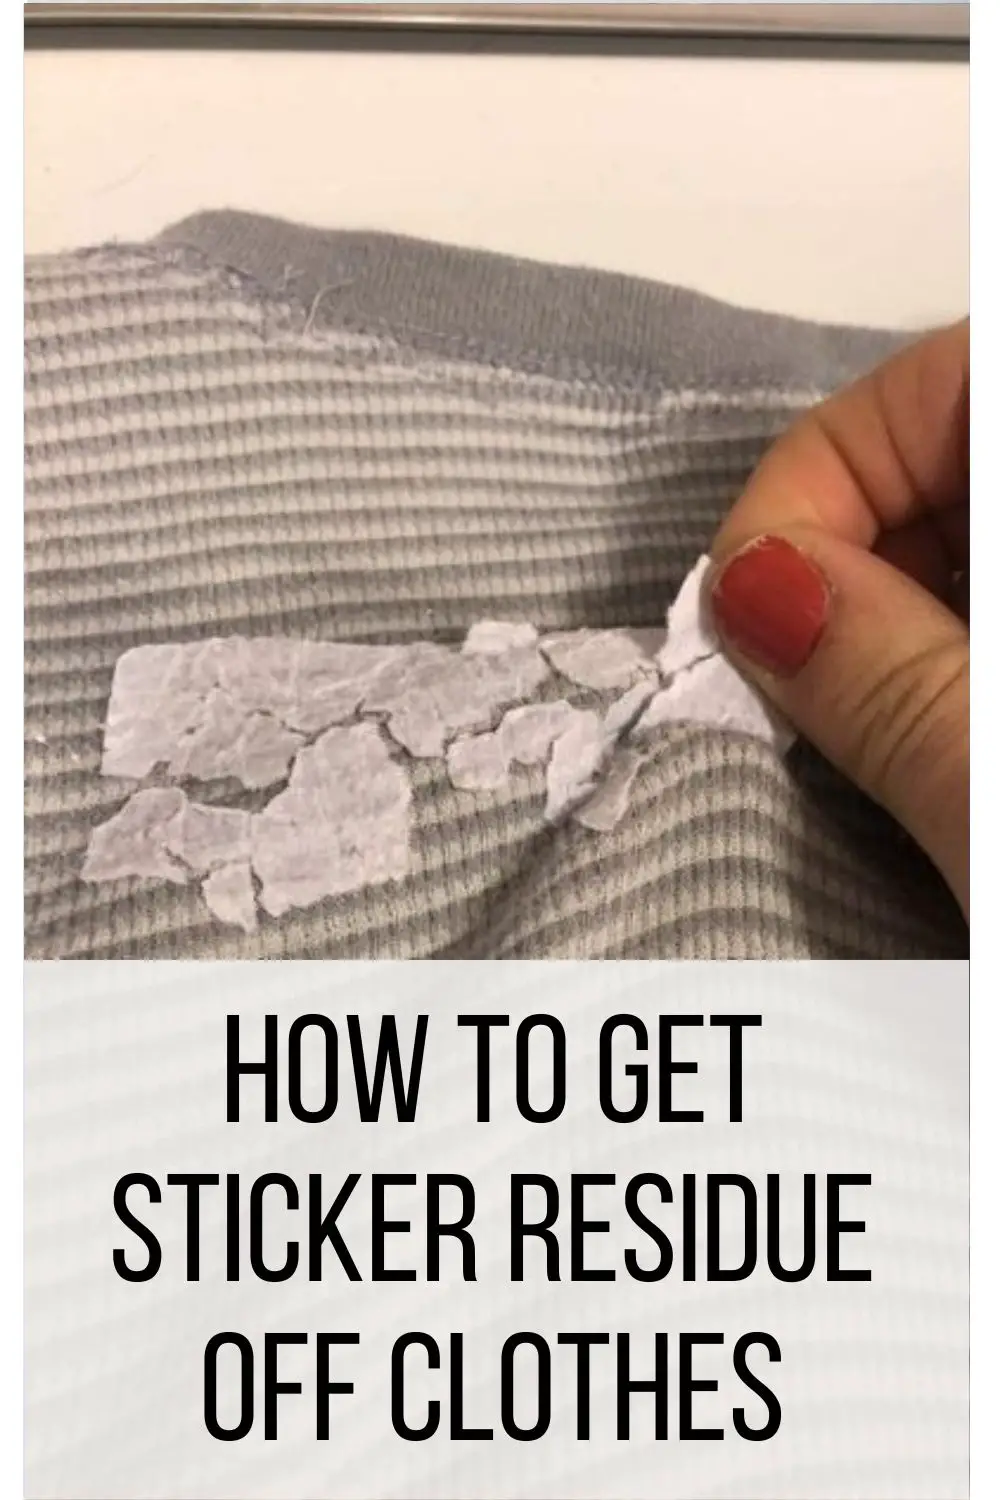 How To Get Sticker Residue Off Clothes